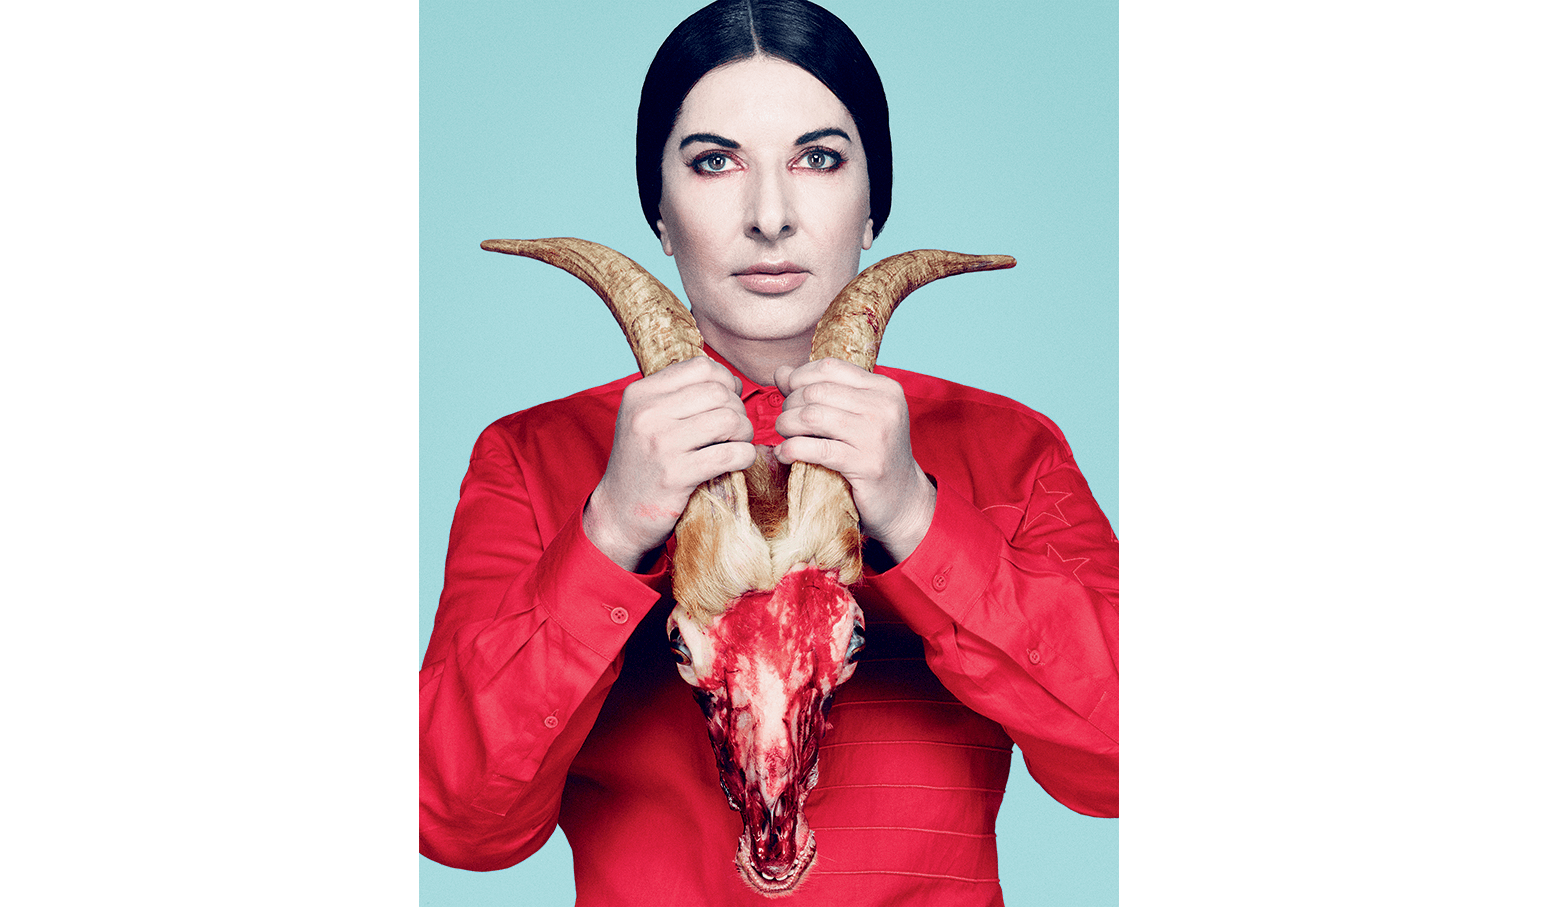 "Do what you fear or don't know", Marina Abramovich